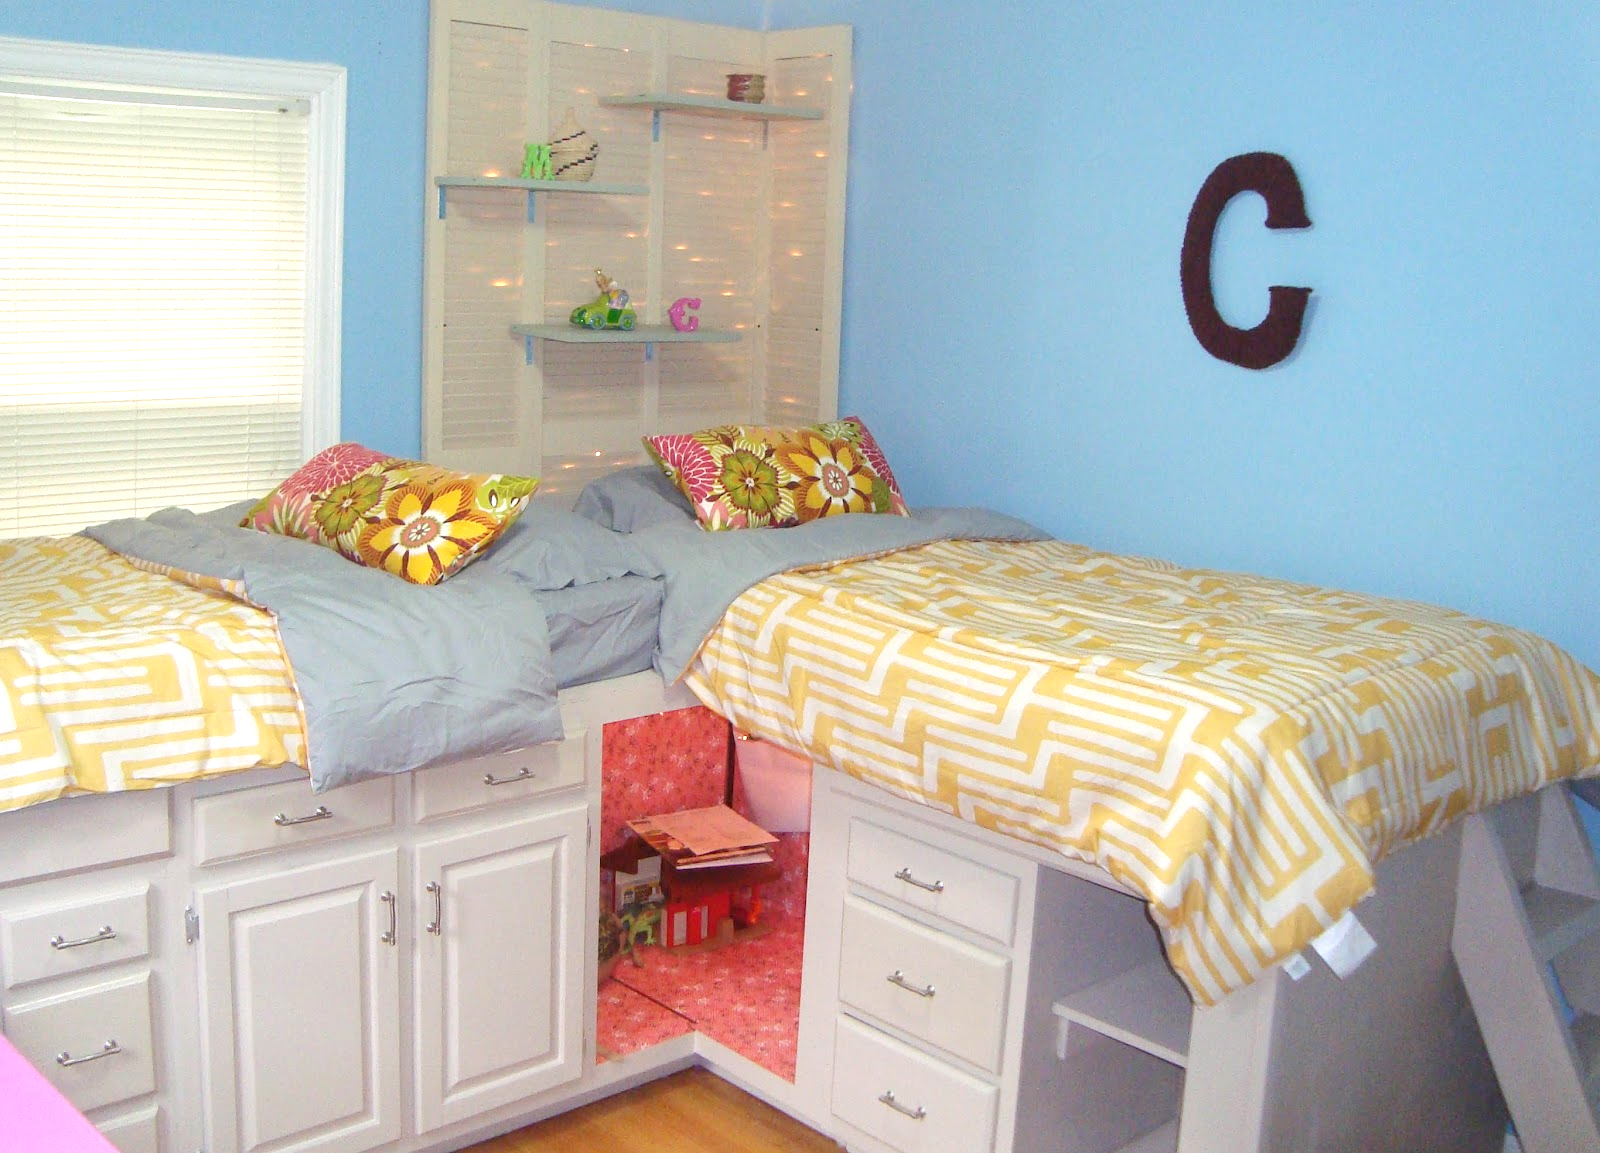 8 Diy Storage Beds To Add Extra Space, How To Make A Twin Bed With Storage